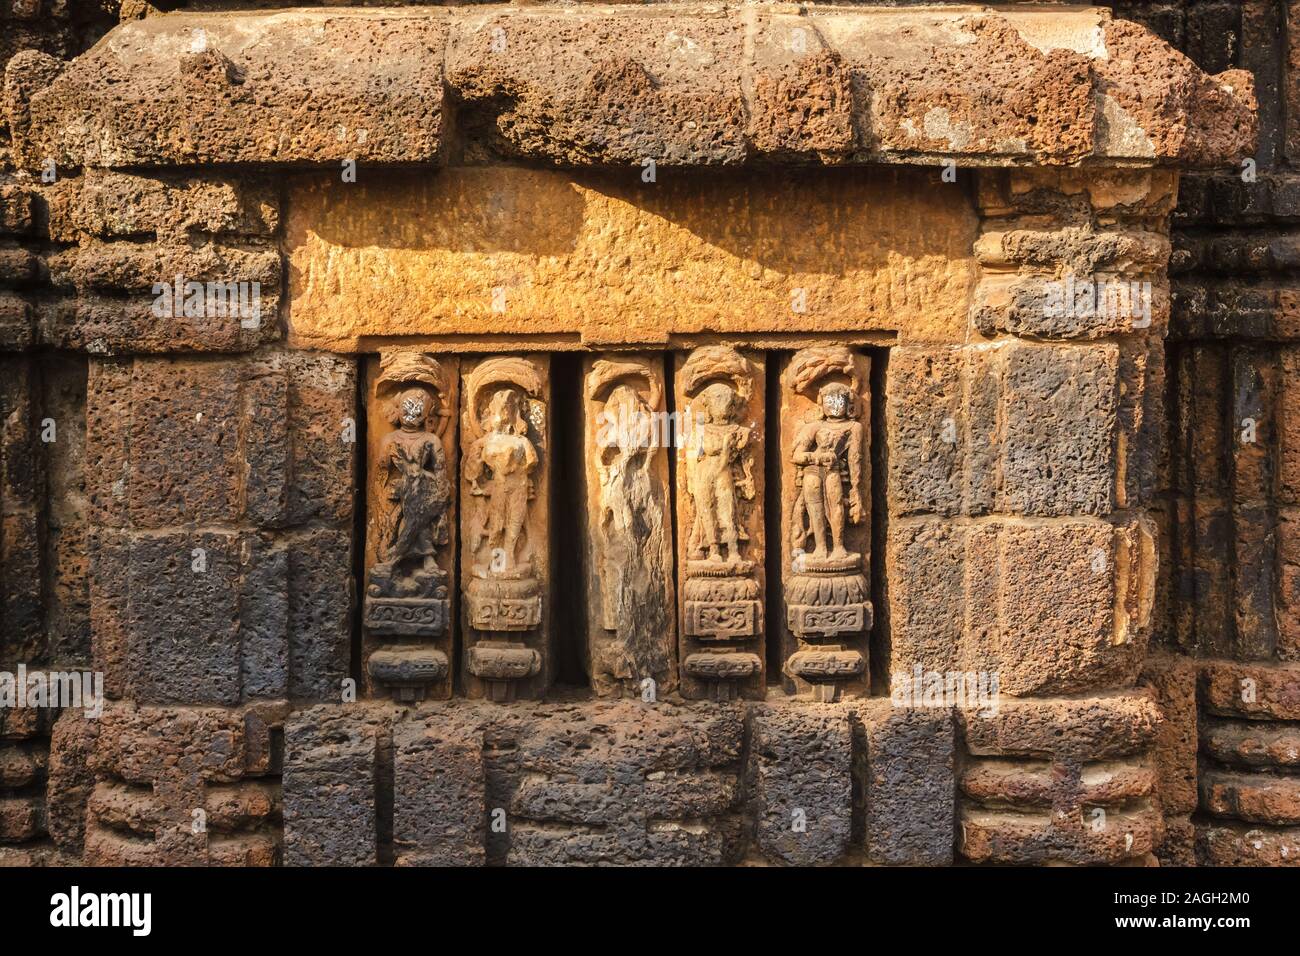 The artfully carved figurines on the laterite walls of an ancient Hindu temple in the city of Bhubaneshwar in Orissa, India. Stock Photo